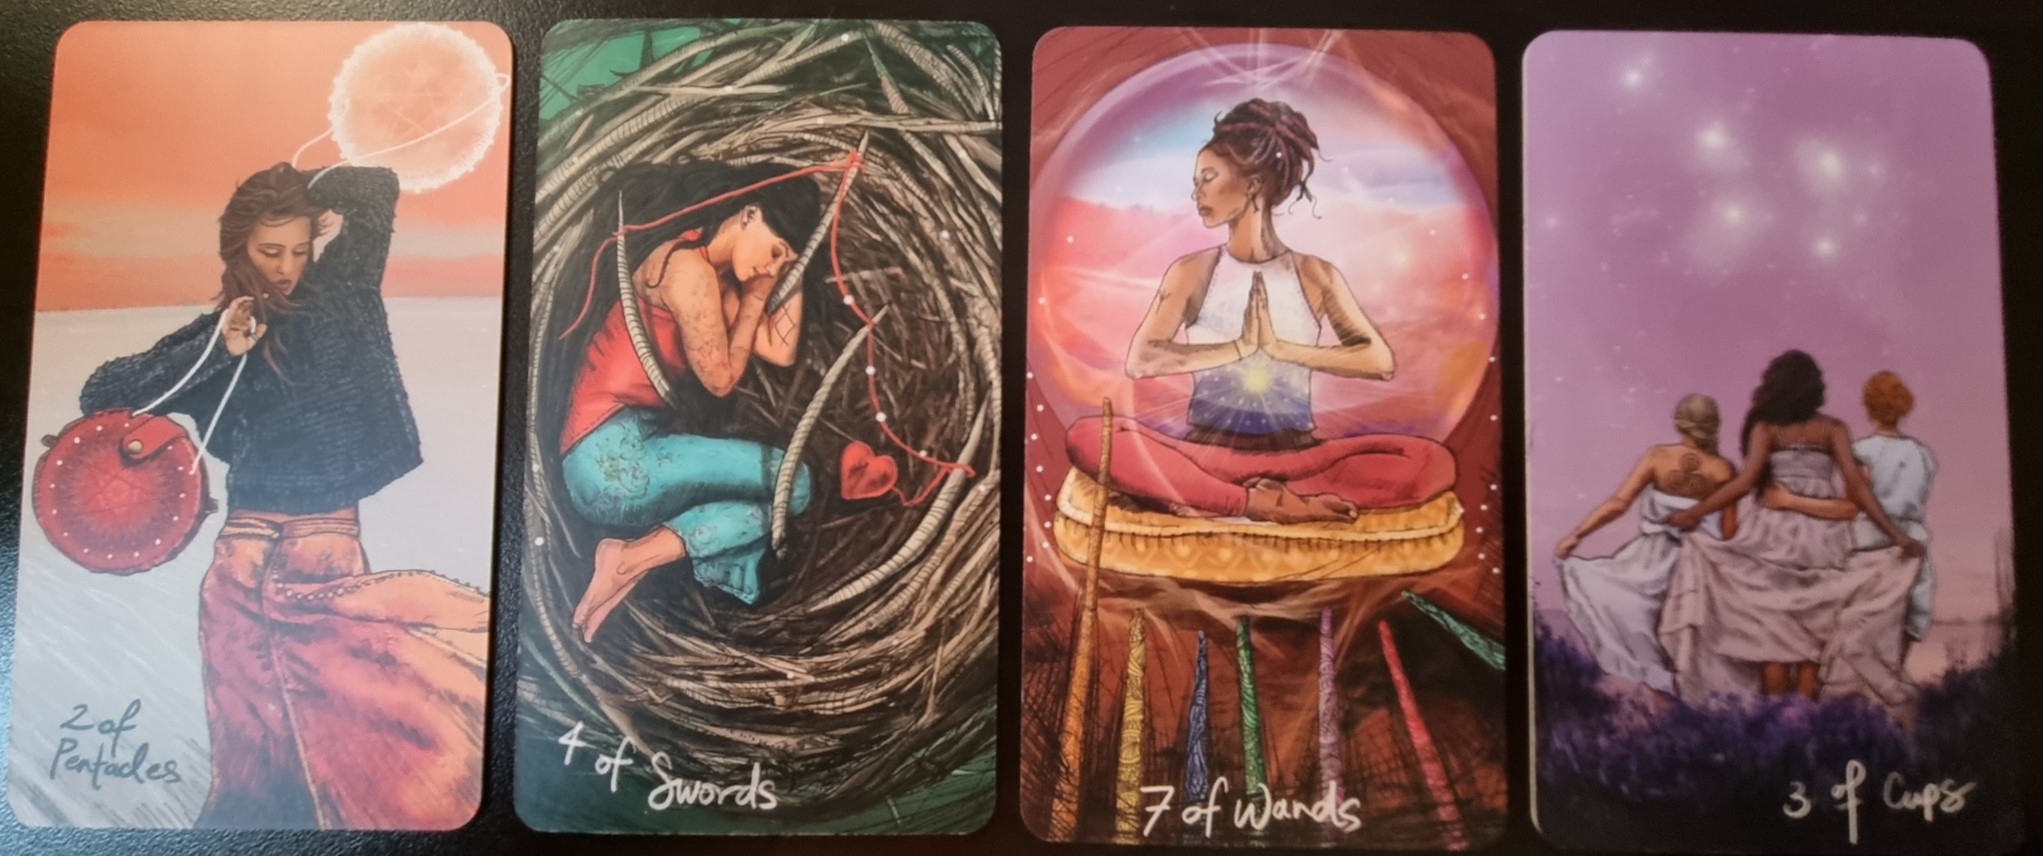 Read more about the article Self-Care Guidance: Lessons from the Minor Arcana